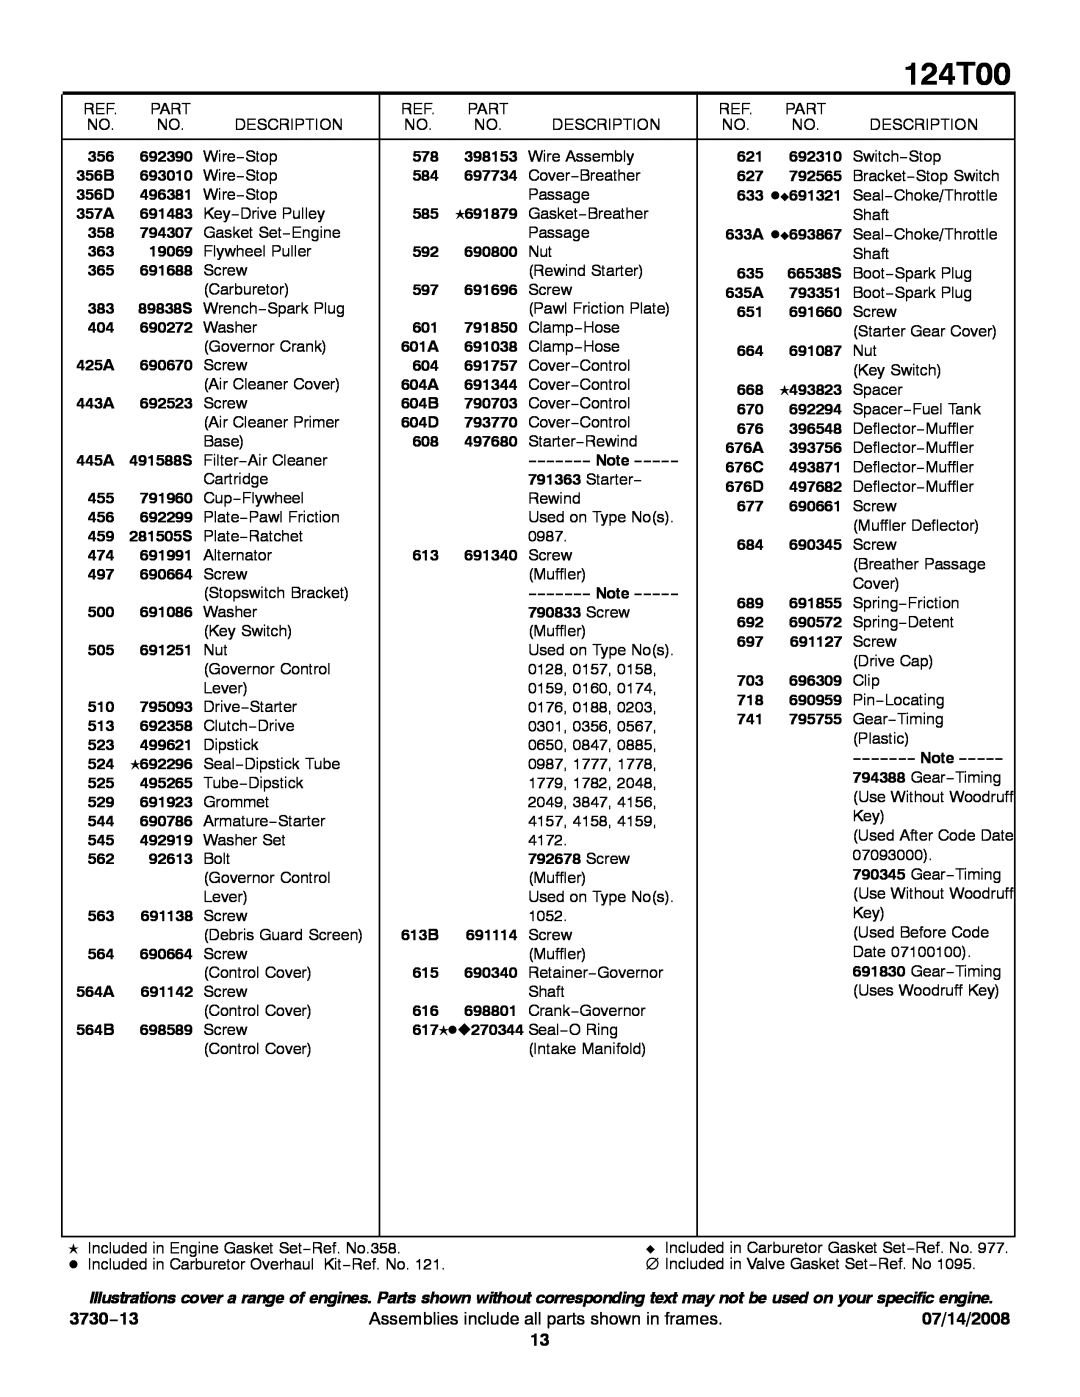 Snapper 124T00 service manual 3730−13, Assemblies include all parts shown in frames, 07/14/2008 